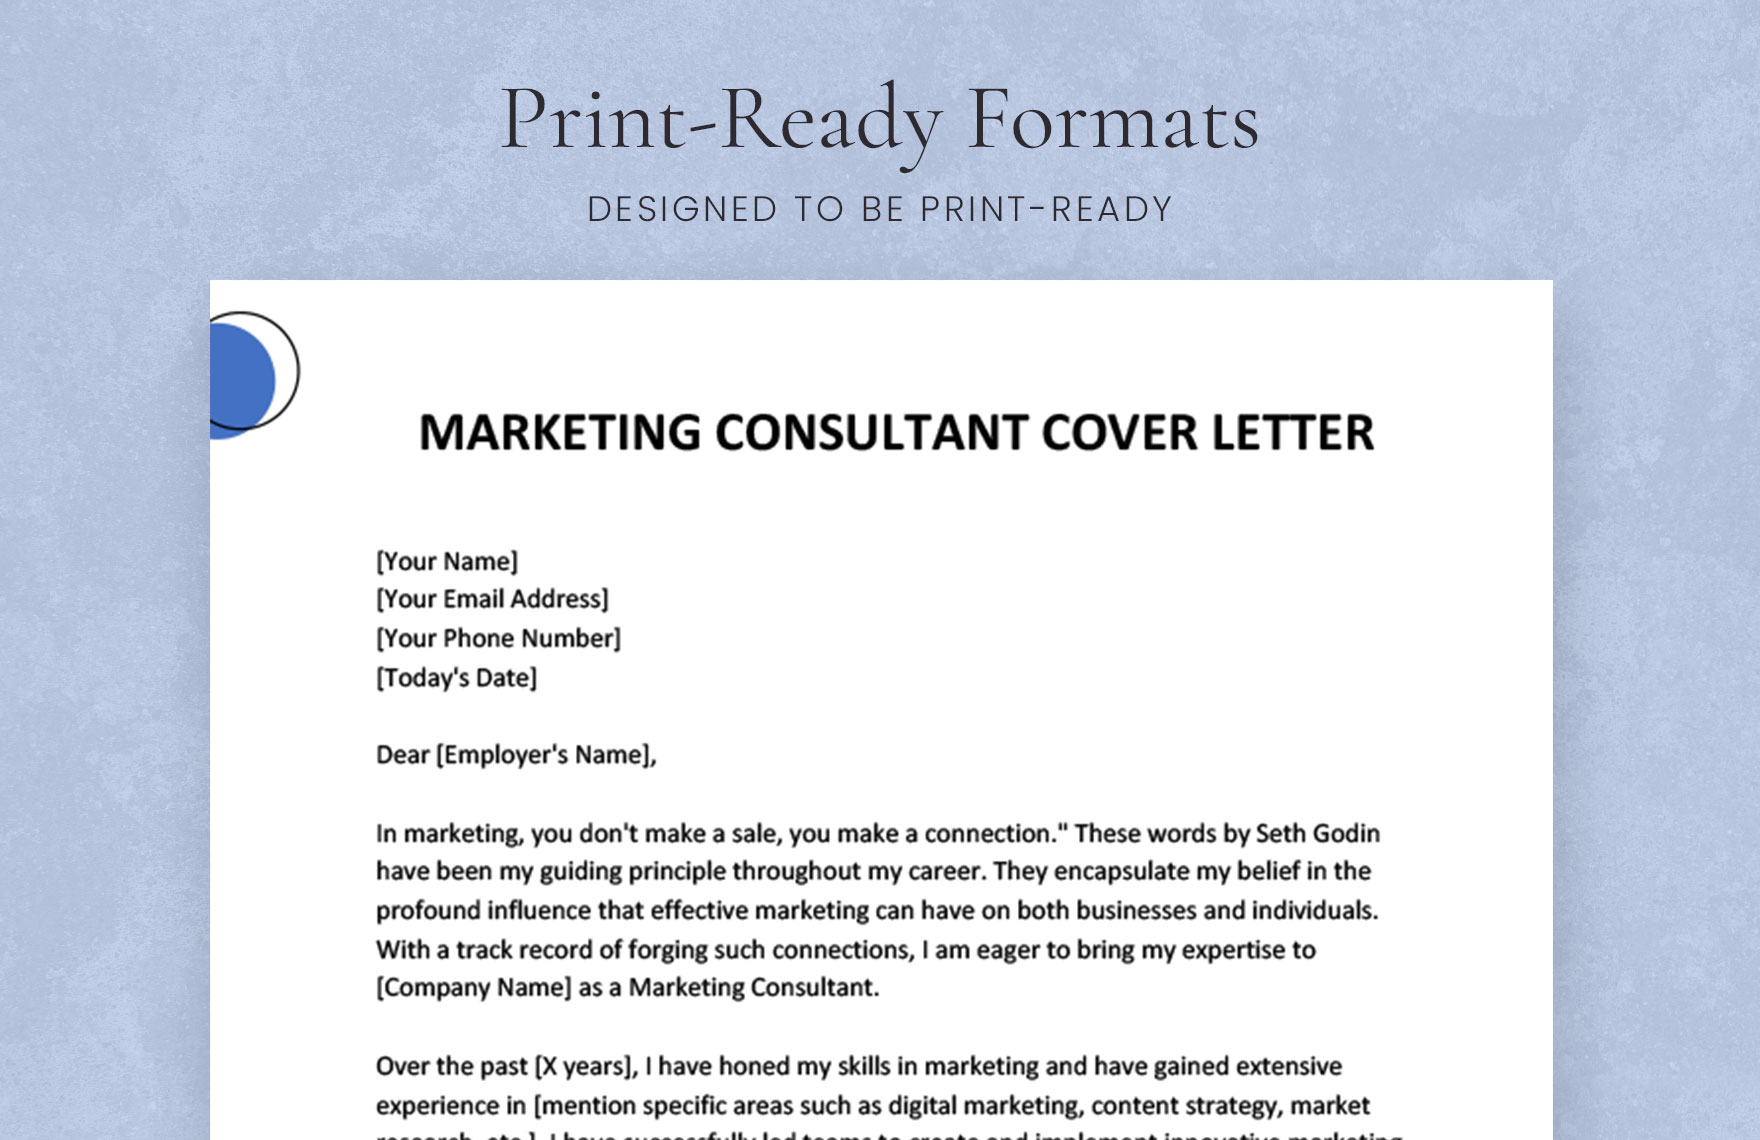 Marketing Consultant Cover Letter